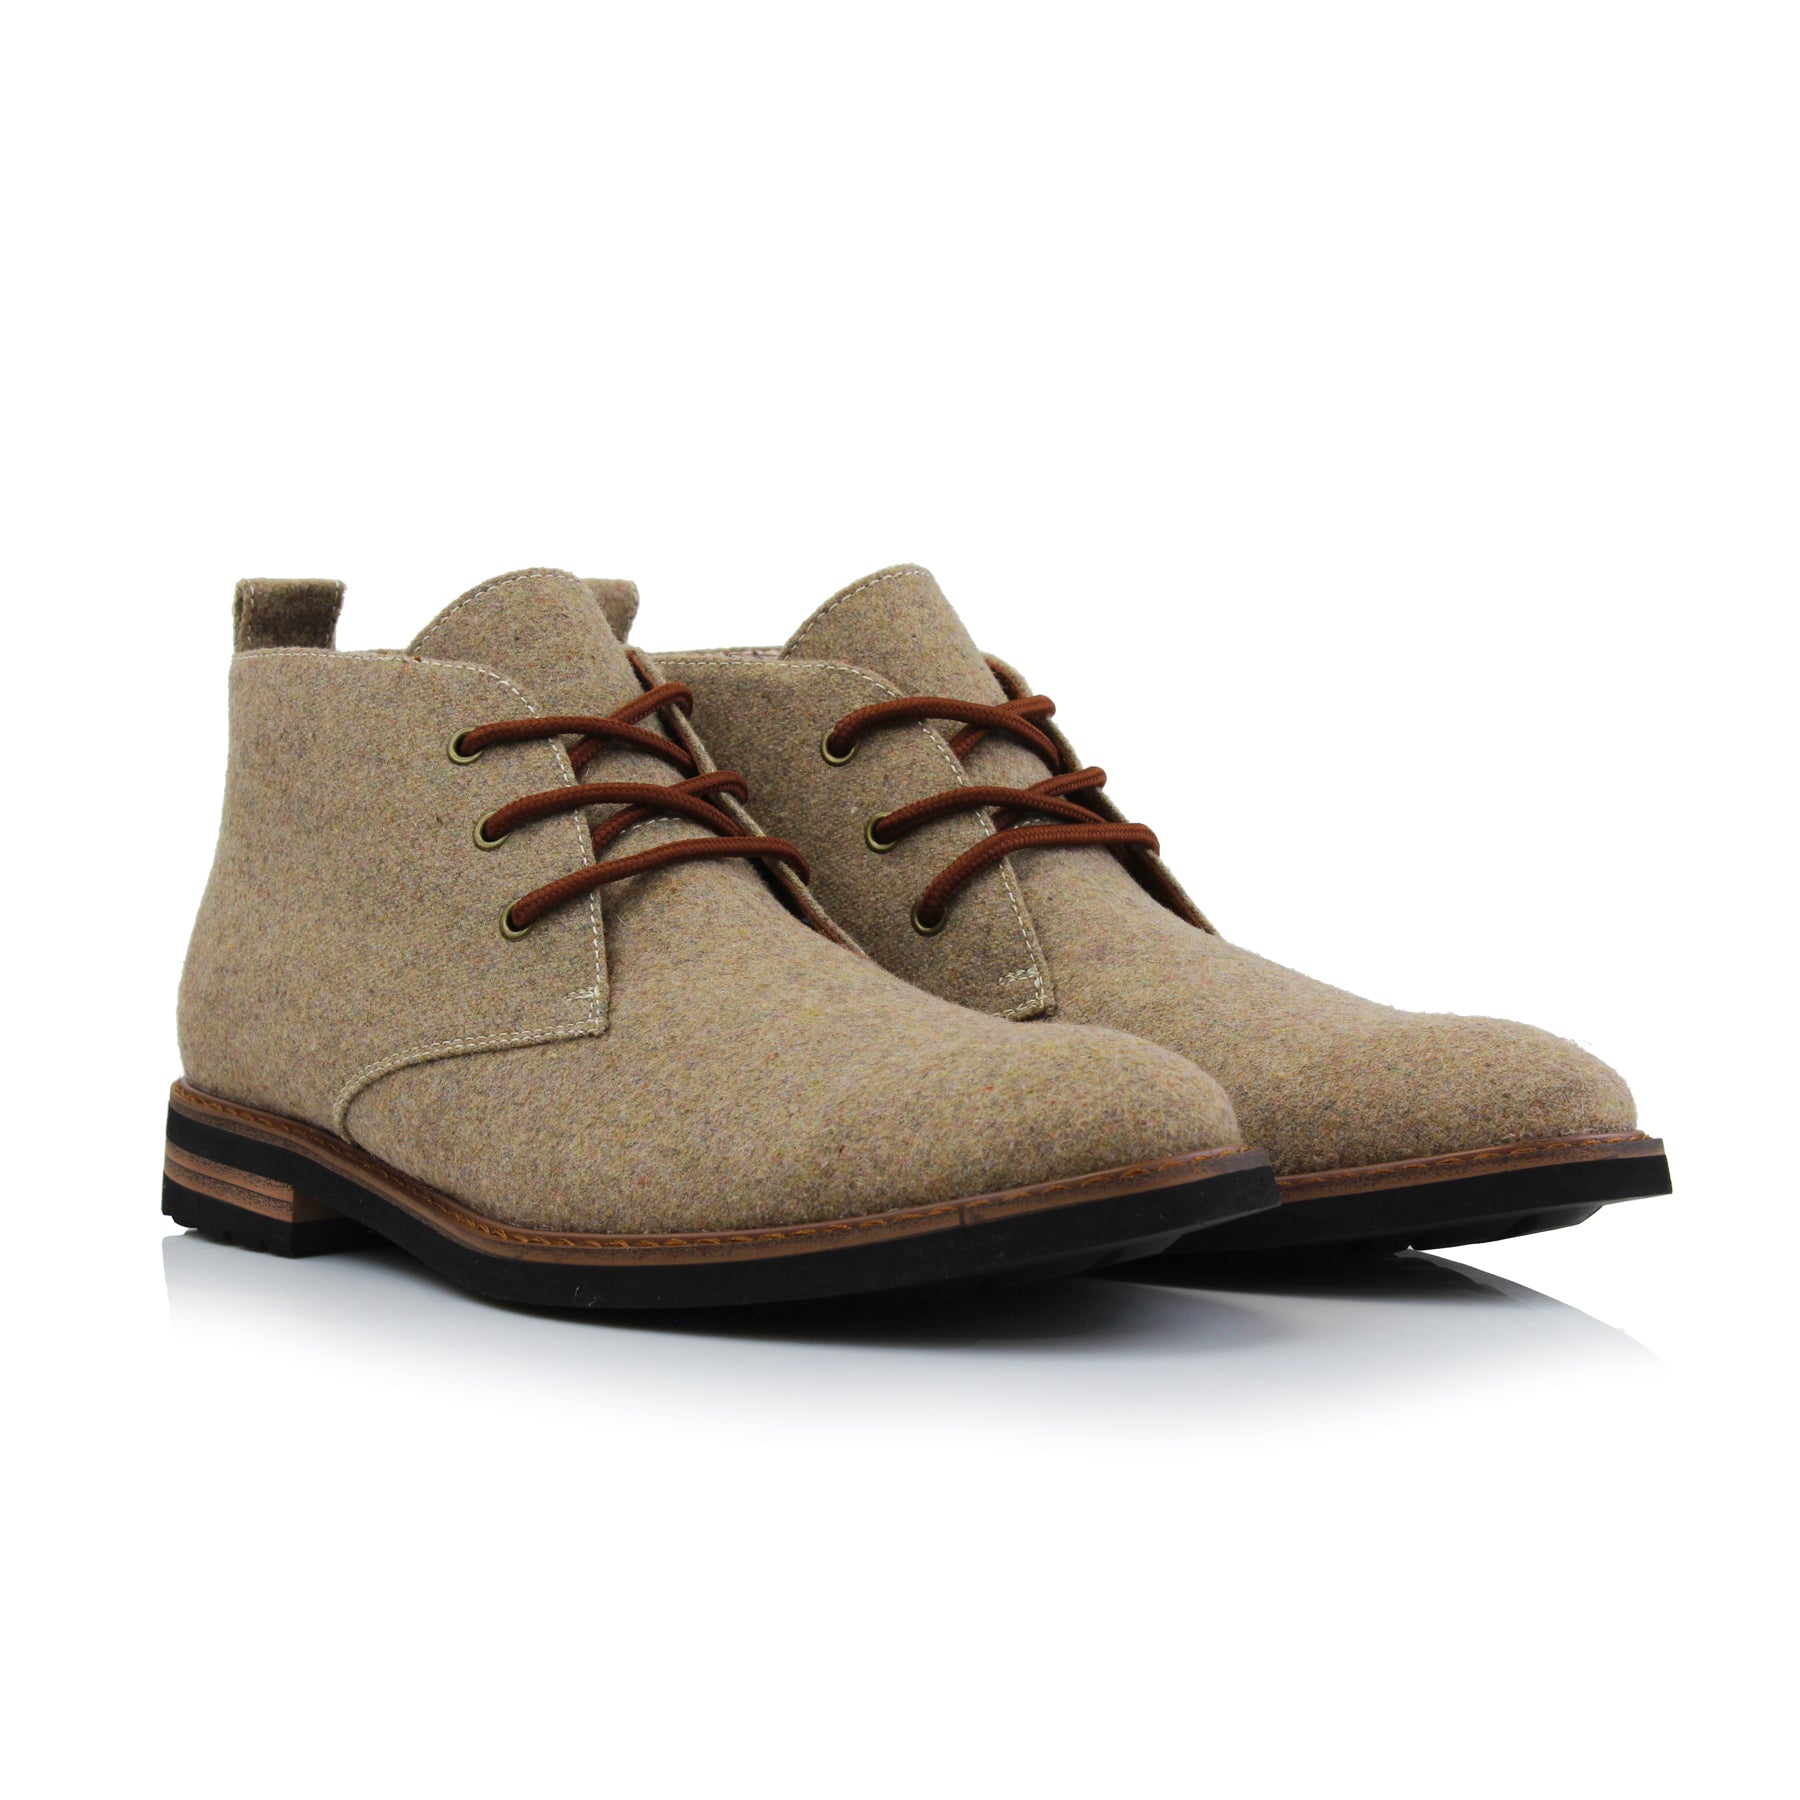 Woolen Chukka Boots | Pablo by Ferro Aldo | Conal Footwear | Paired Angle View